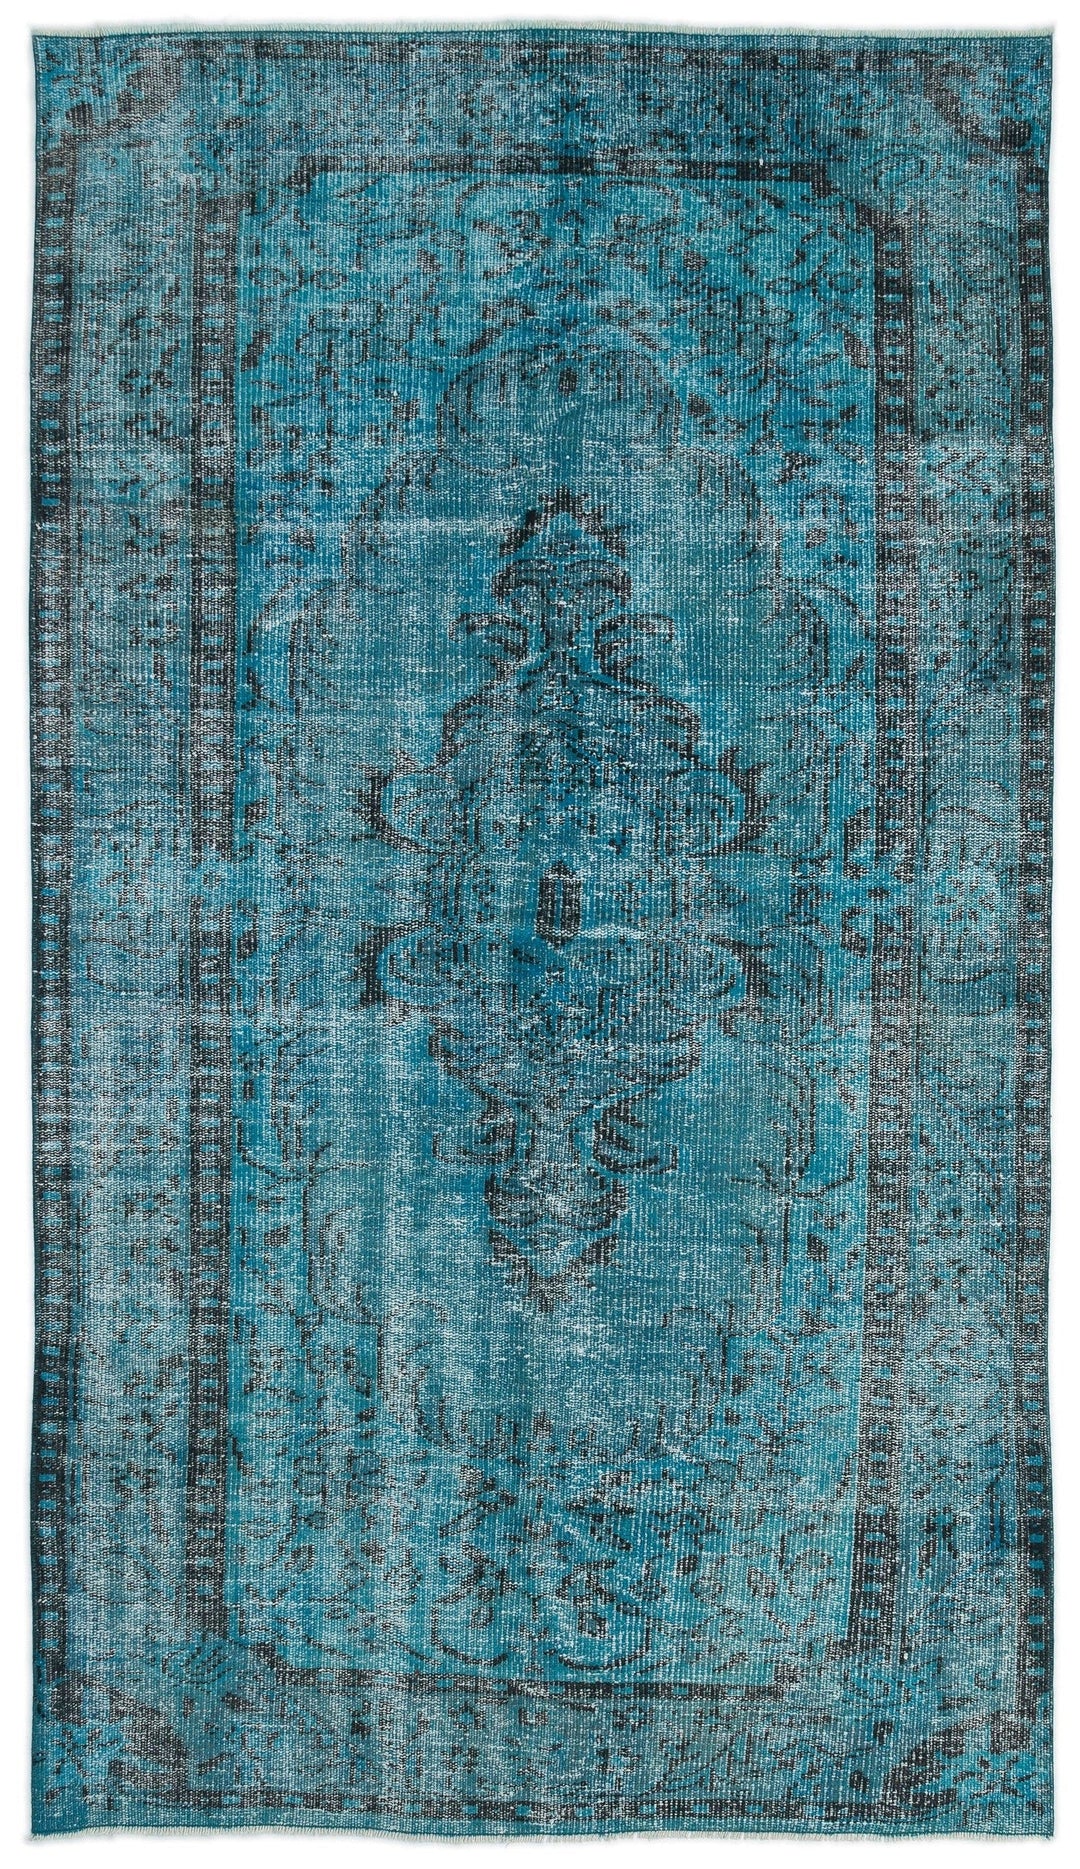 Athens Turquoise Tumbled Wool Hand Woven Carpet 152 x 260